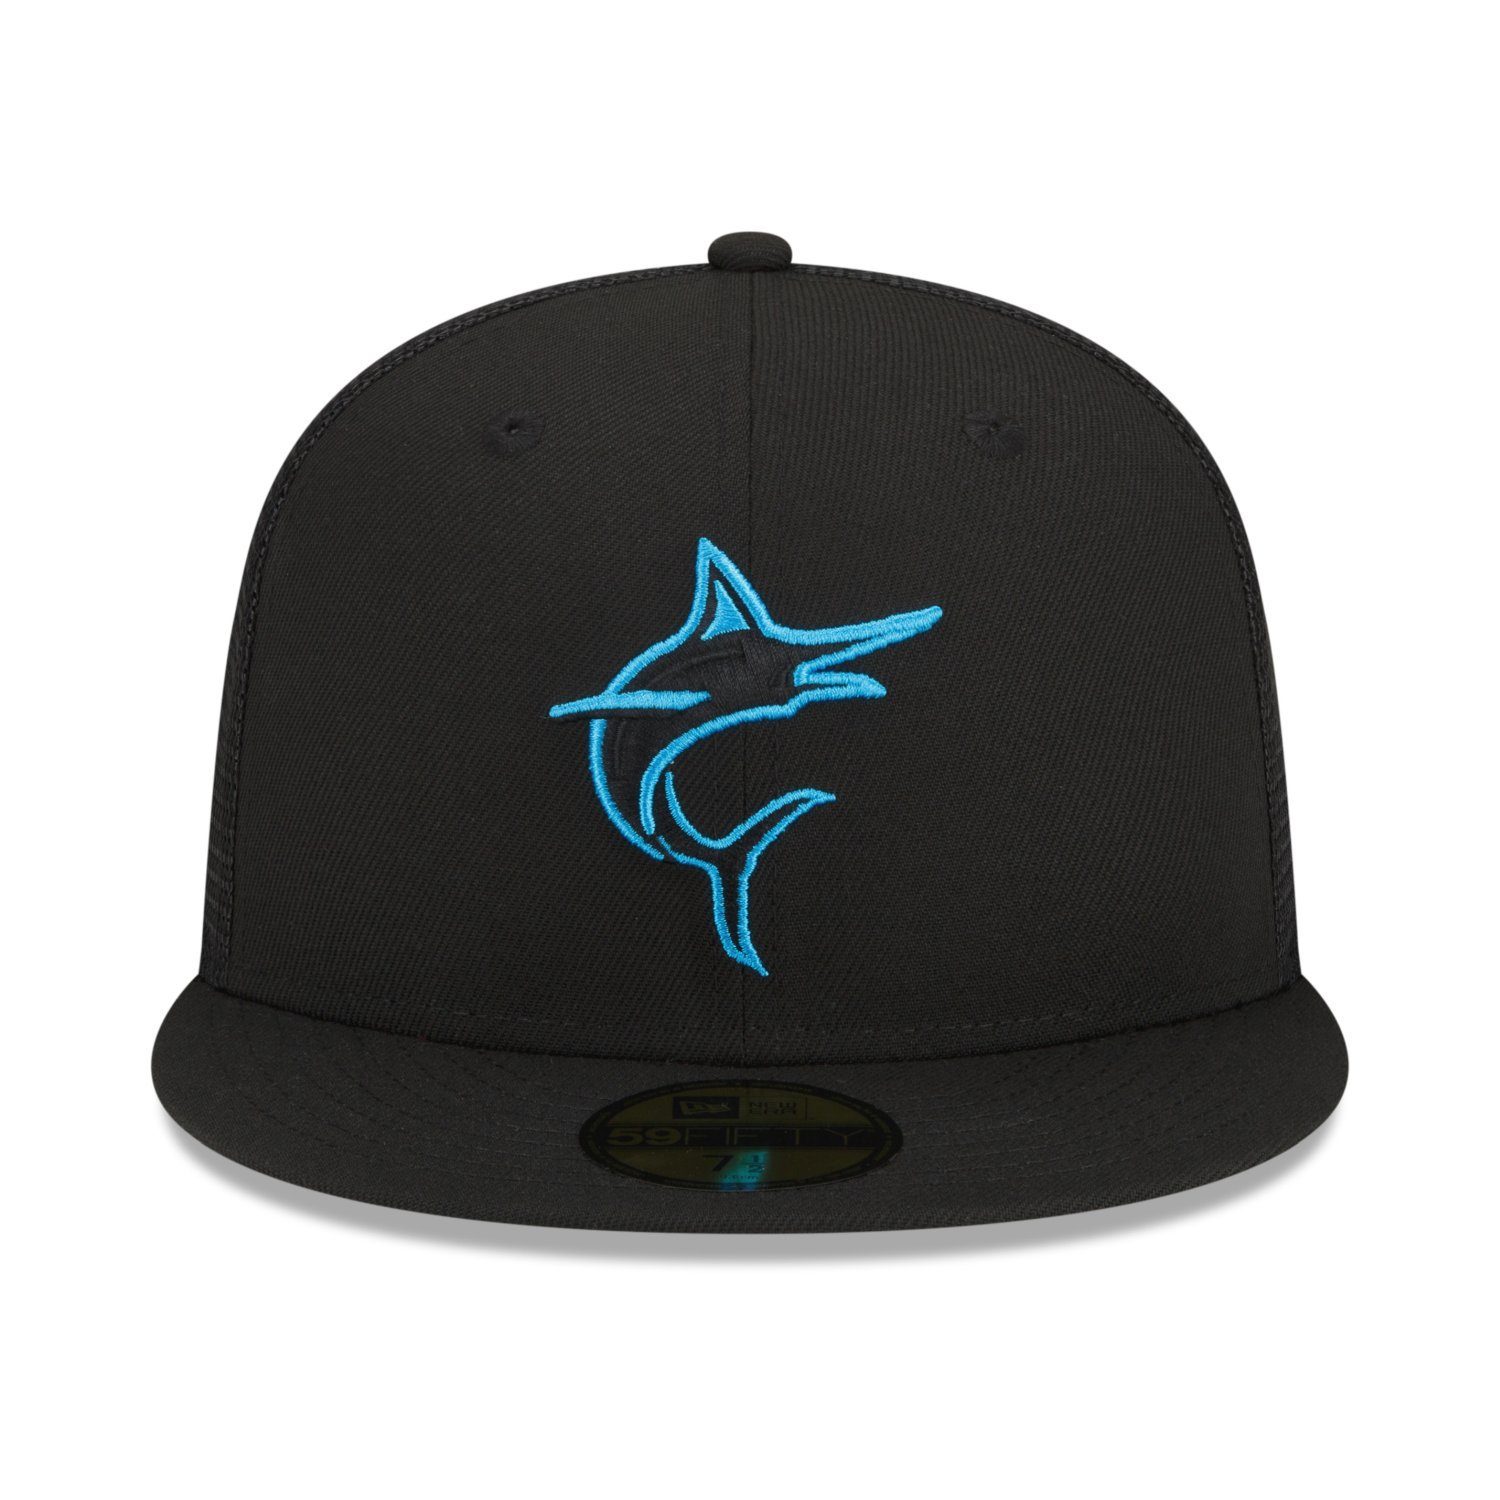 BATTING PRACTICE Cap Miami Era Marlins Fitted New 59Fifty